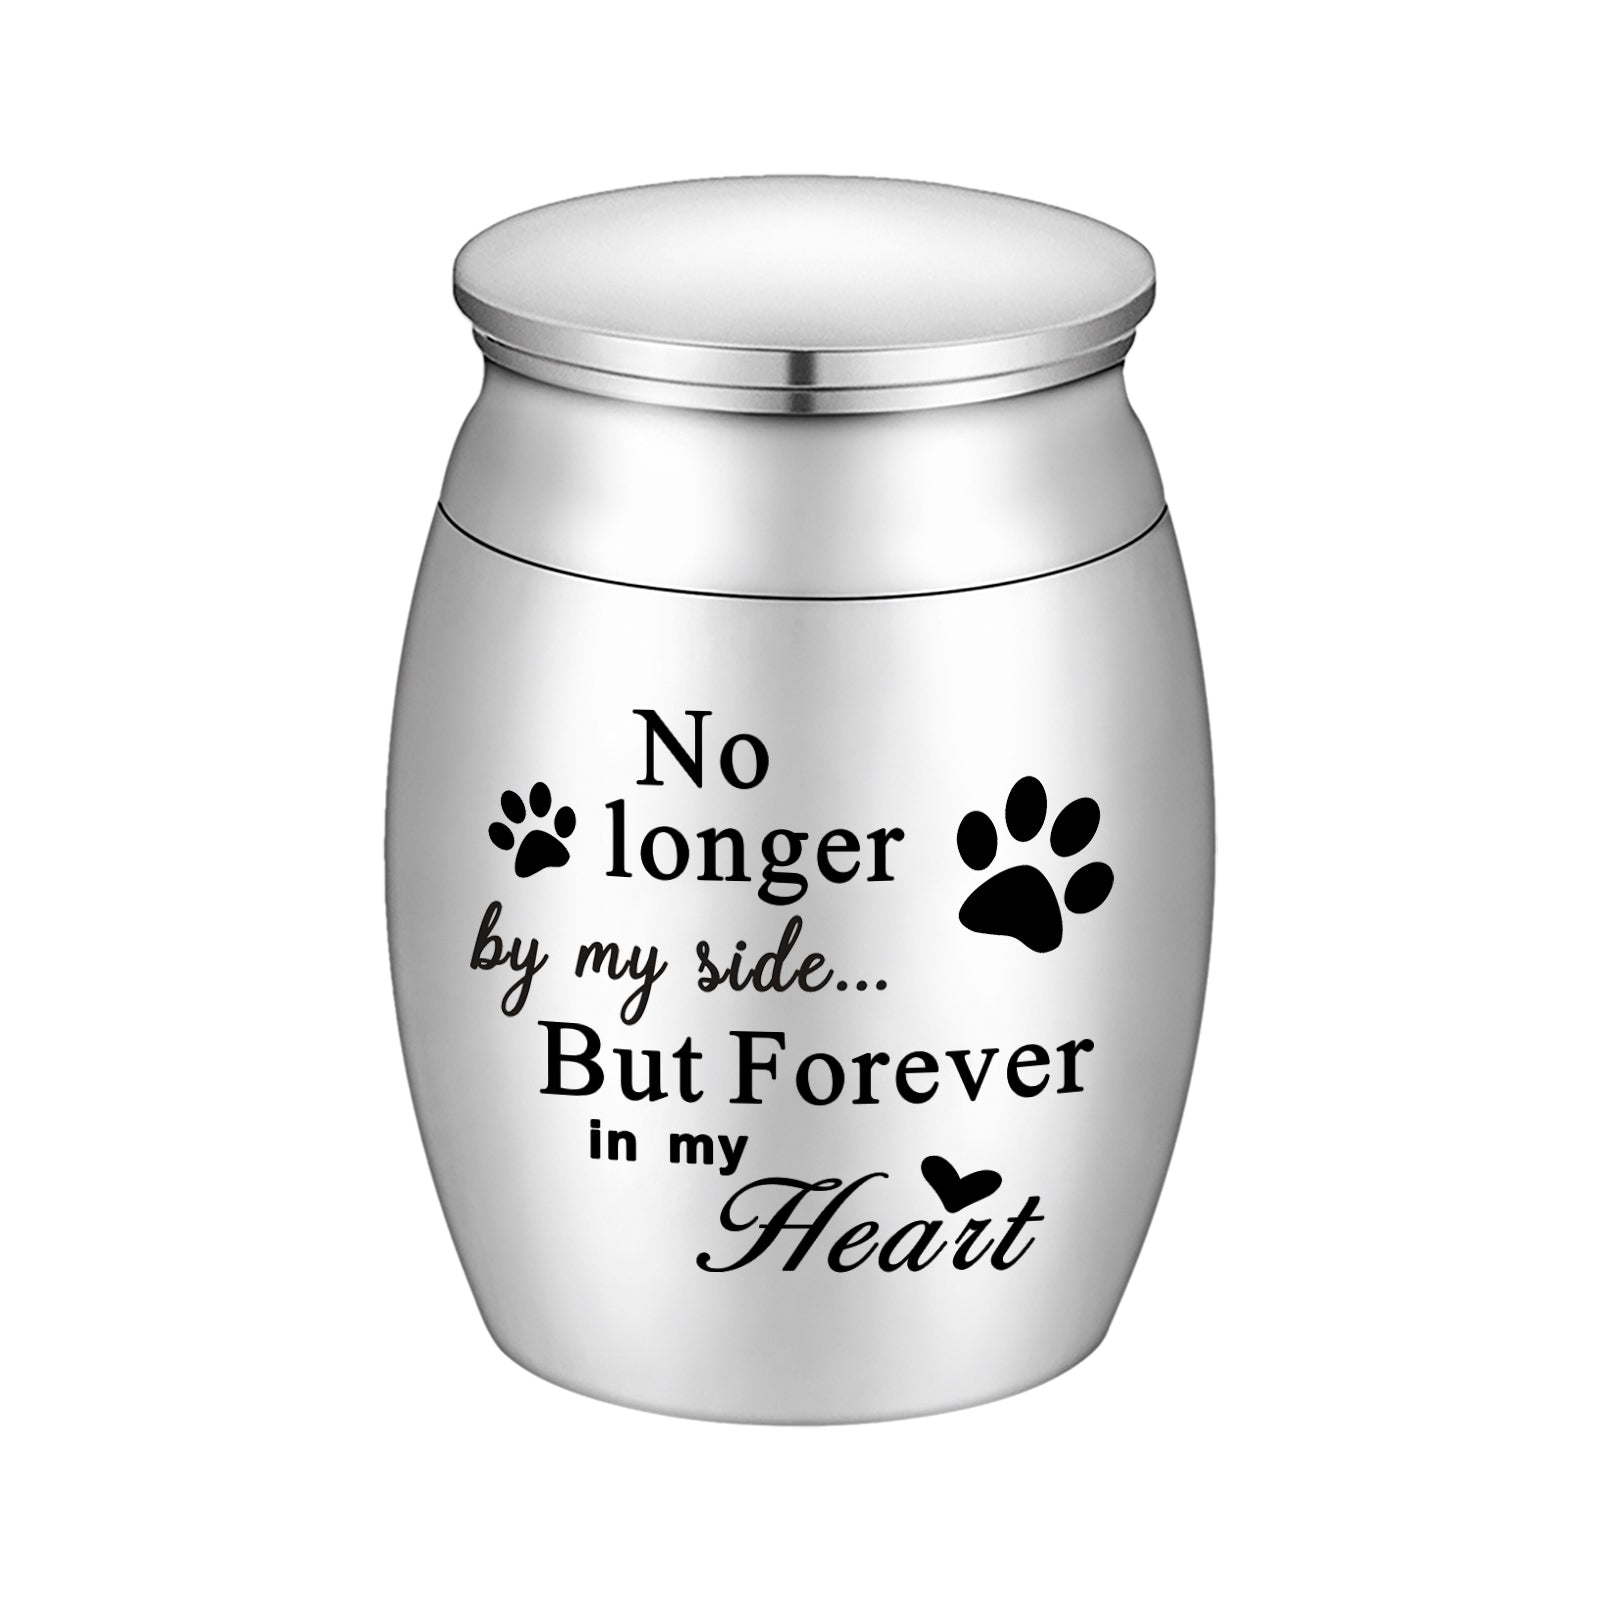 Mini Cremation Urns with Paws